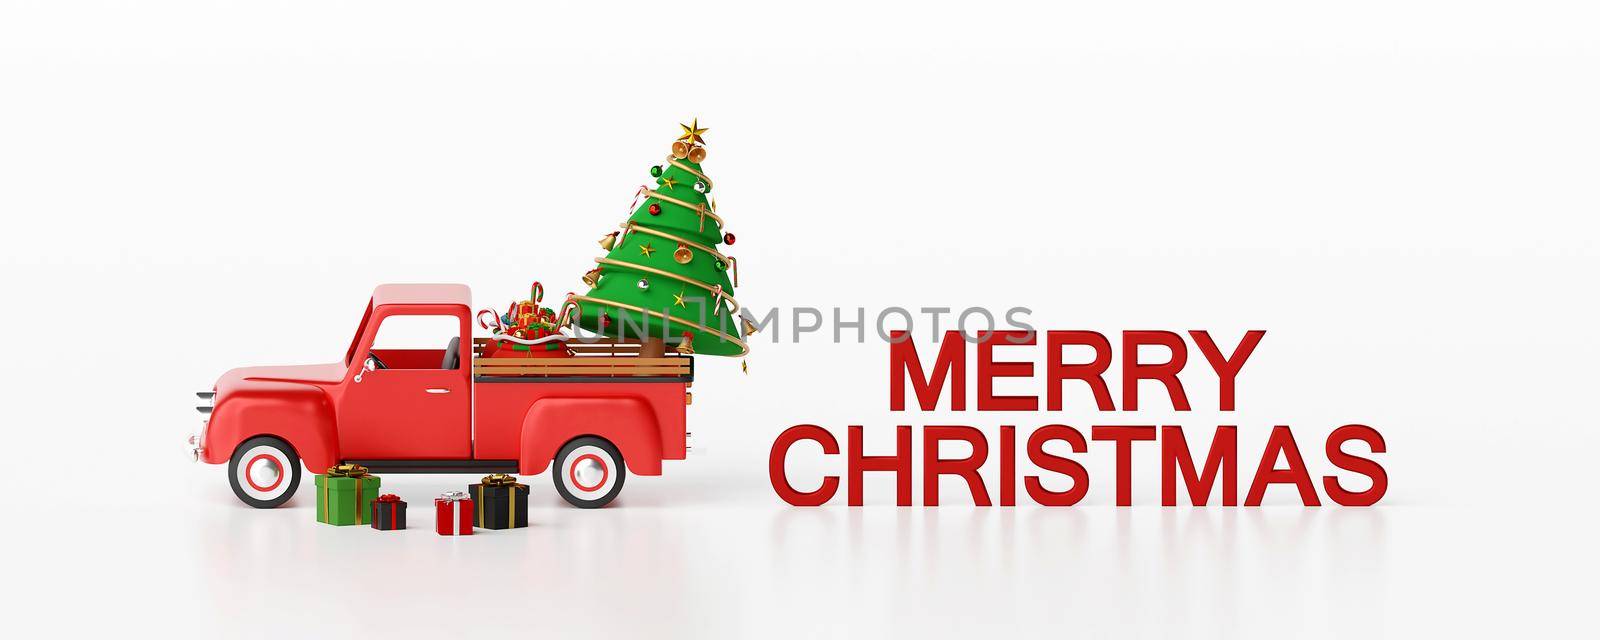 Christmas banner background of Christmas truck and gifts with text Merry Christmas, 3d rendering by nutzchotwarut